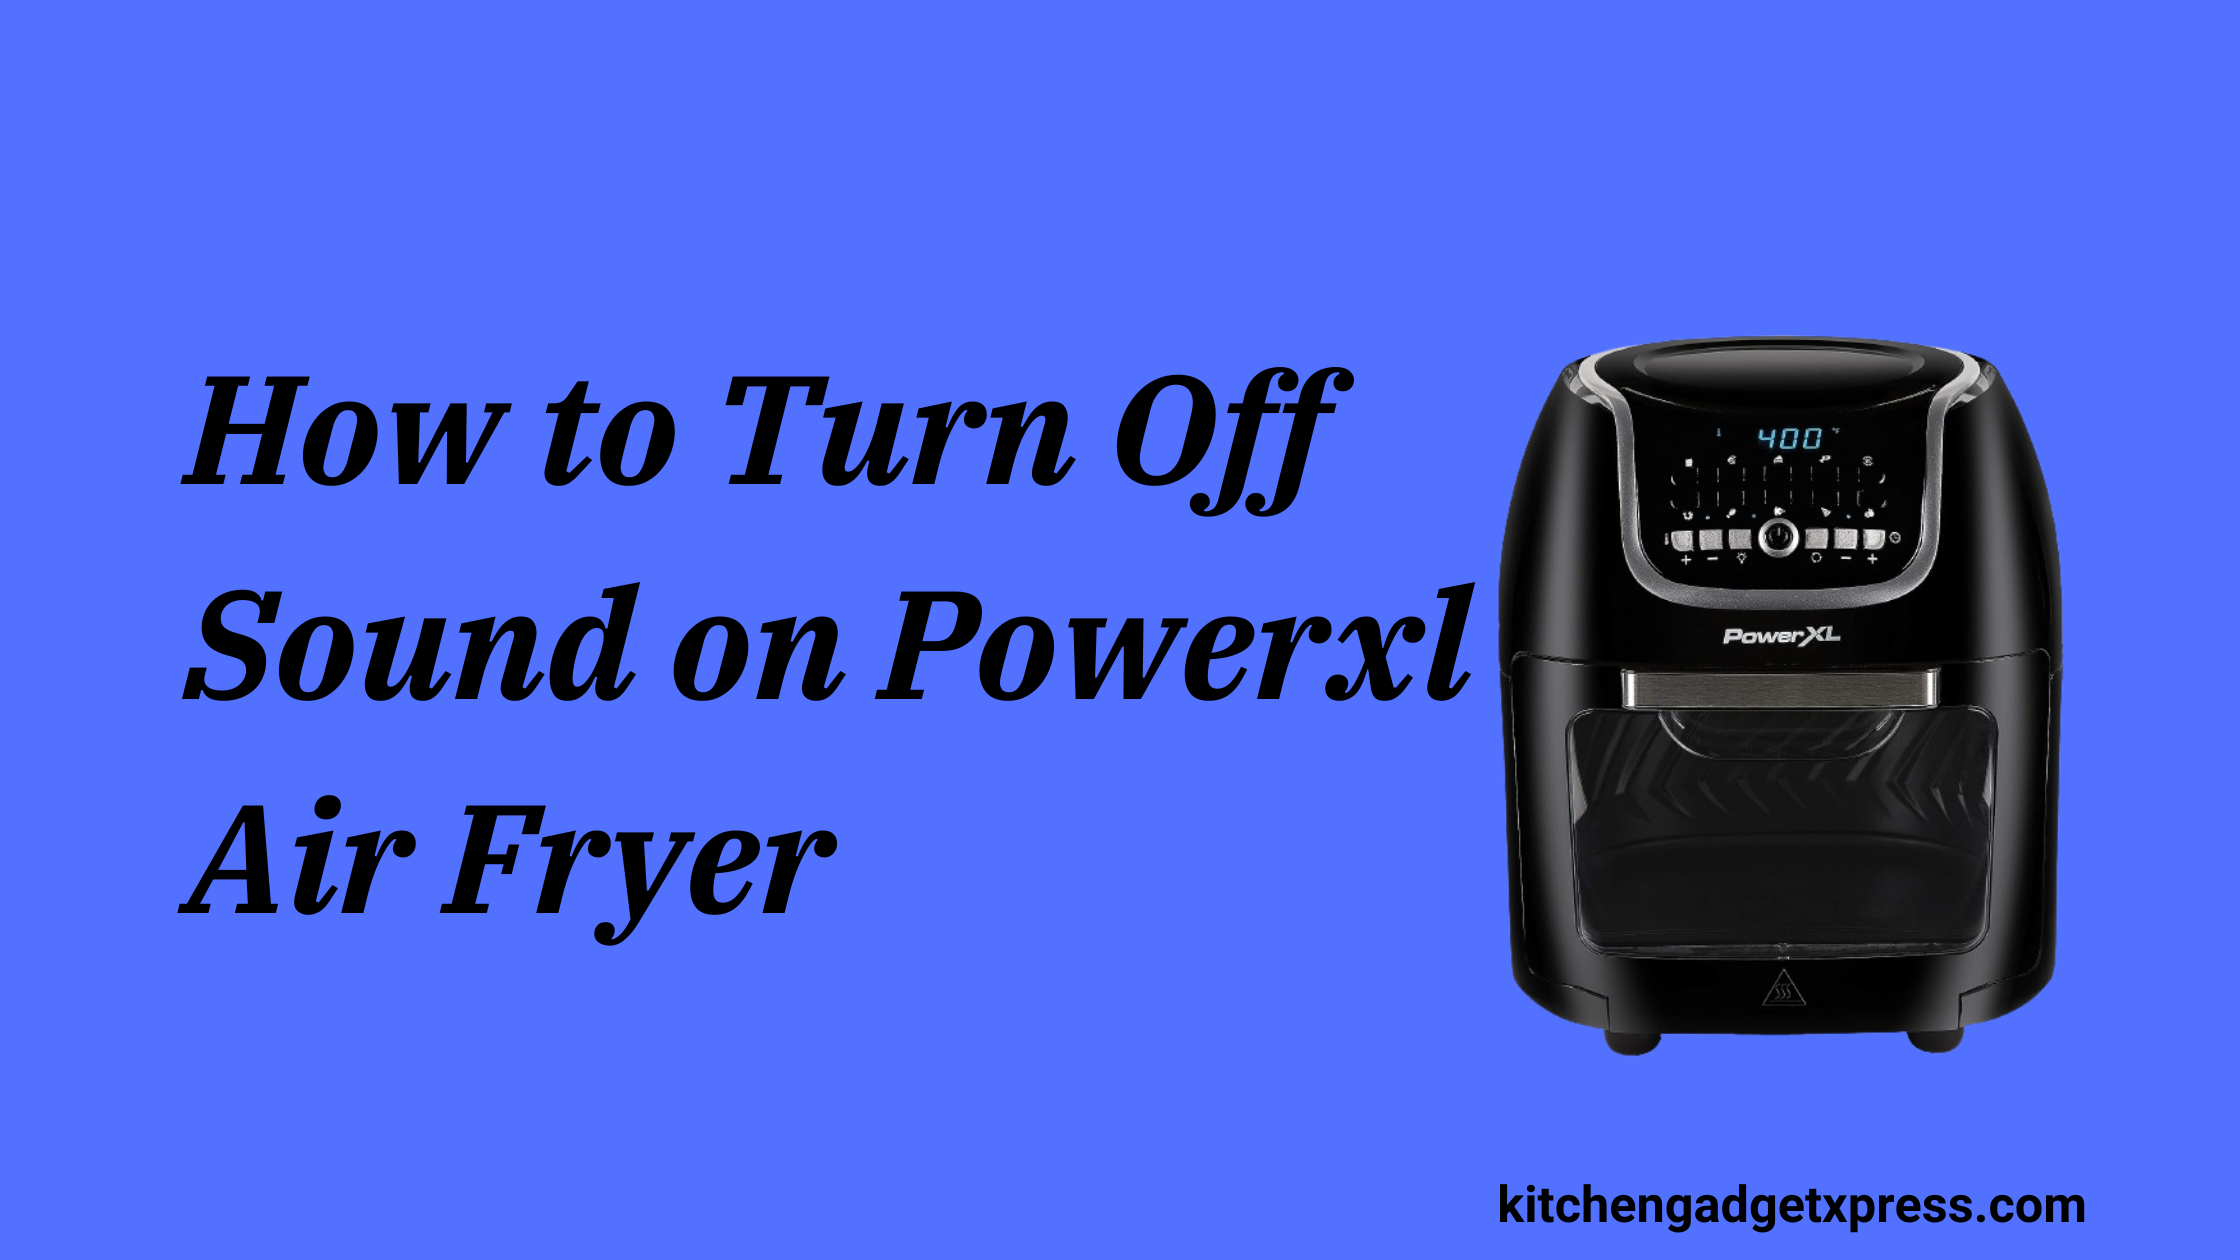 How to Turn Off Sound on Powerxl Air Fryer